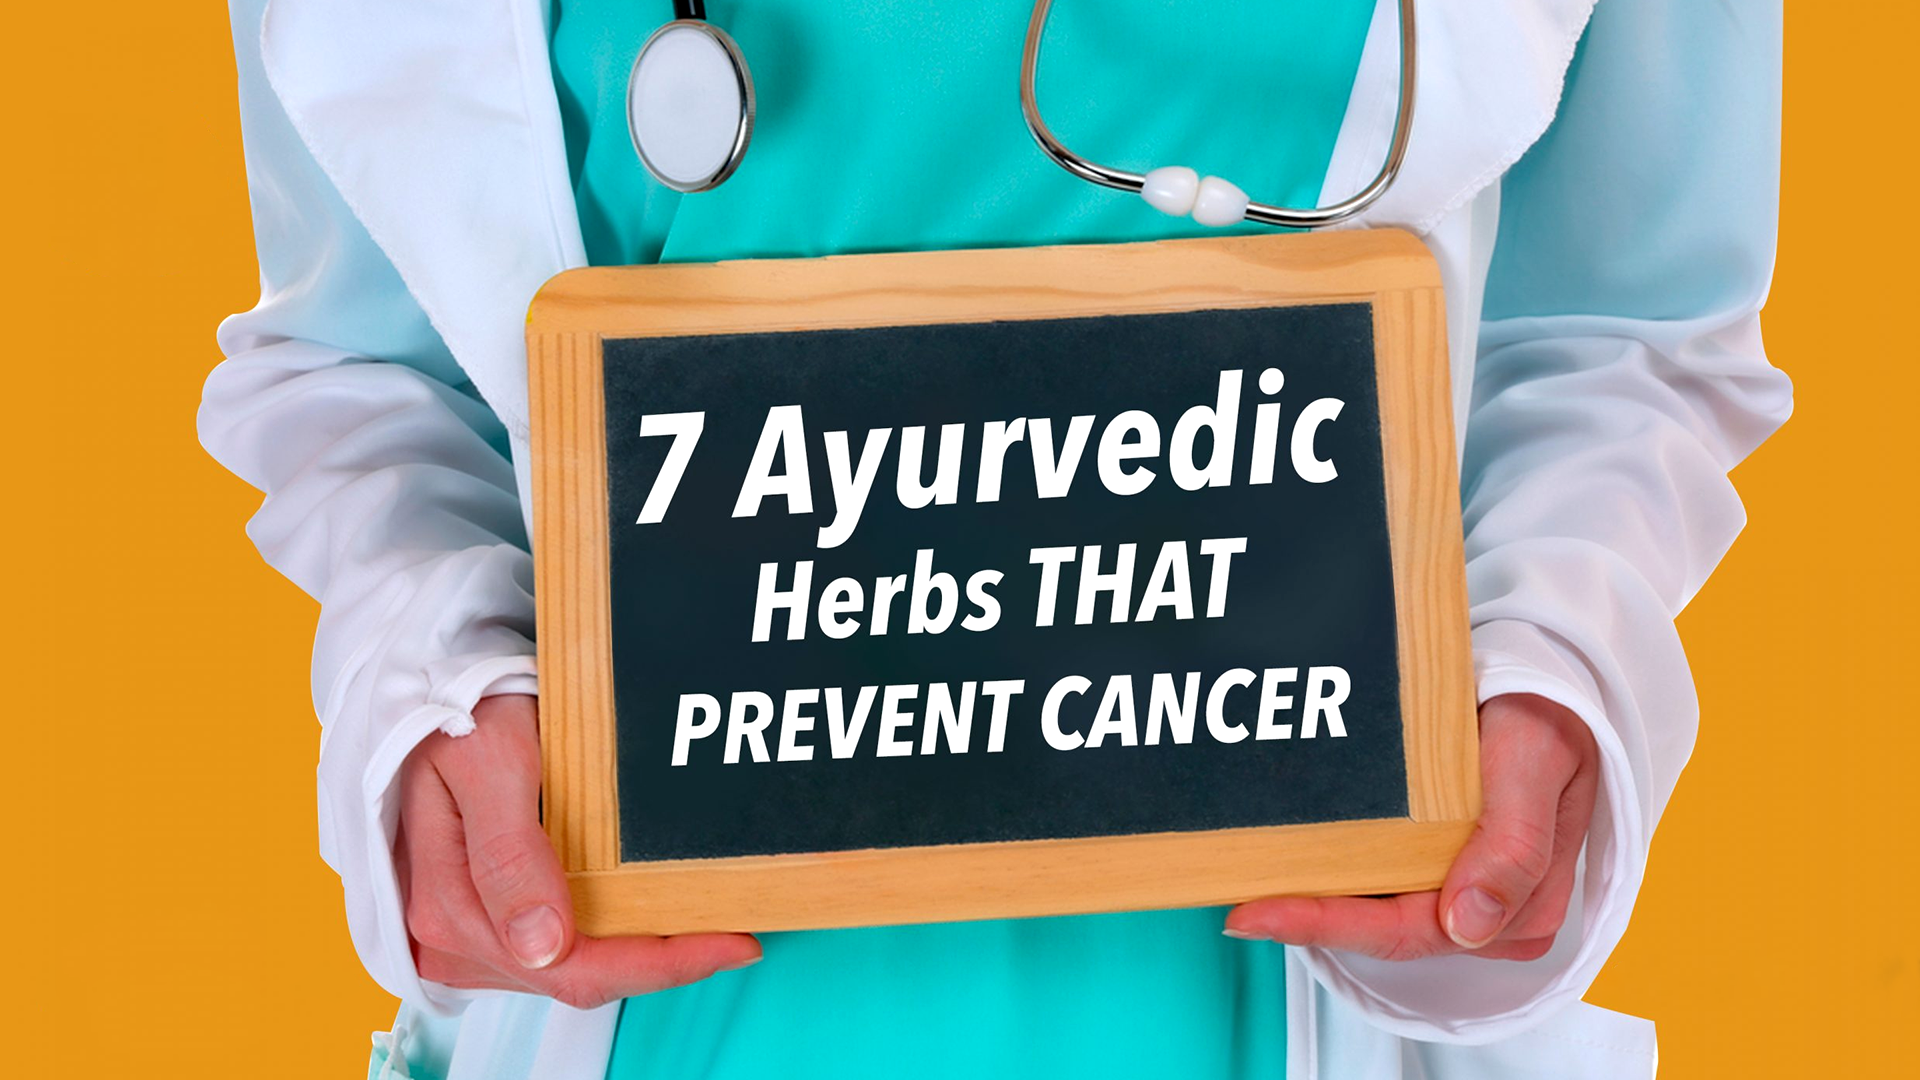 7 Ayurvedic Herbs That Prevent Cancer